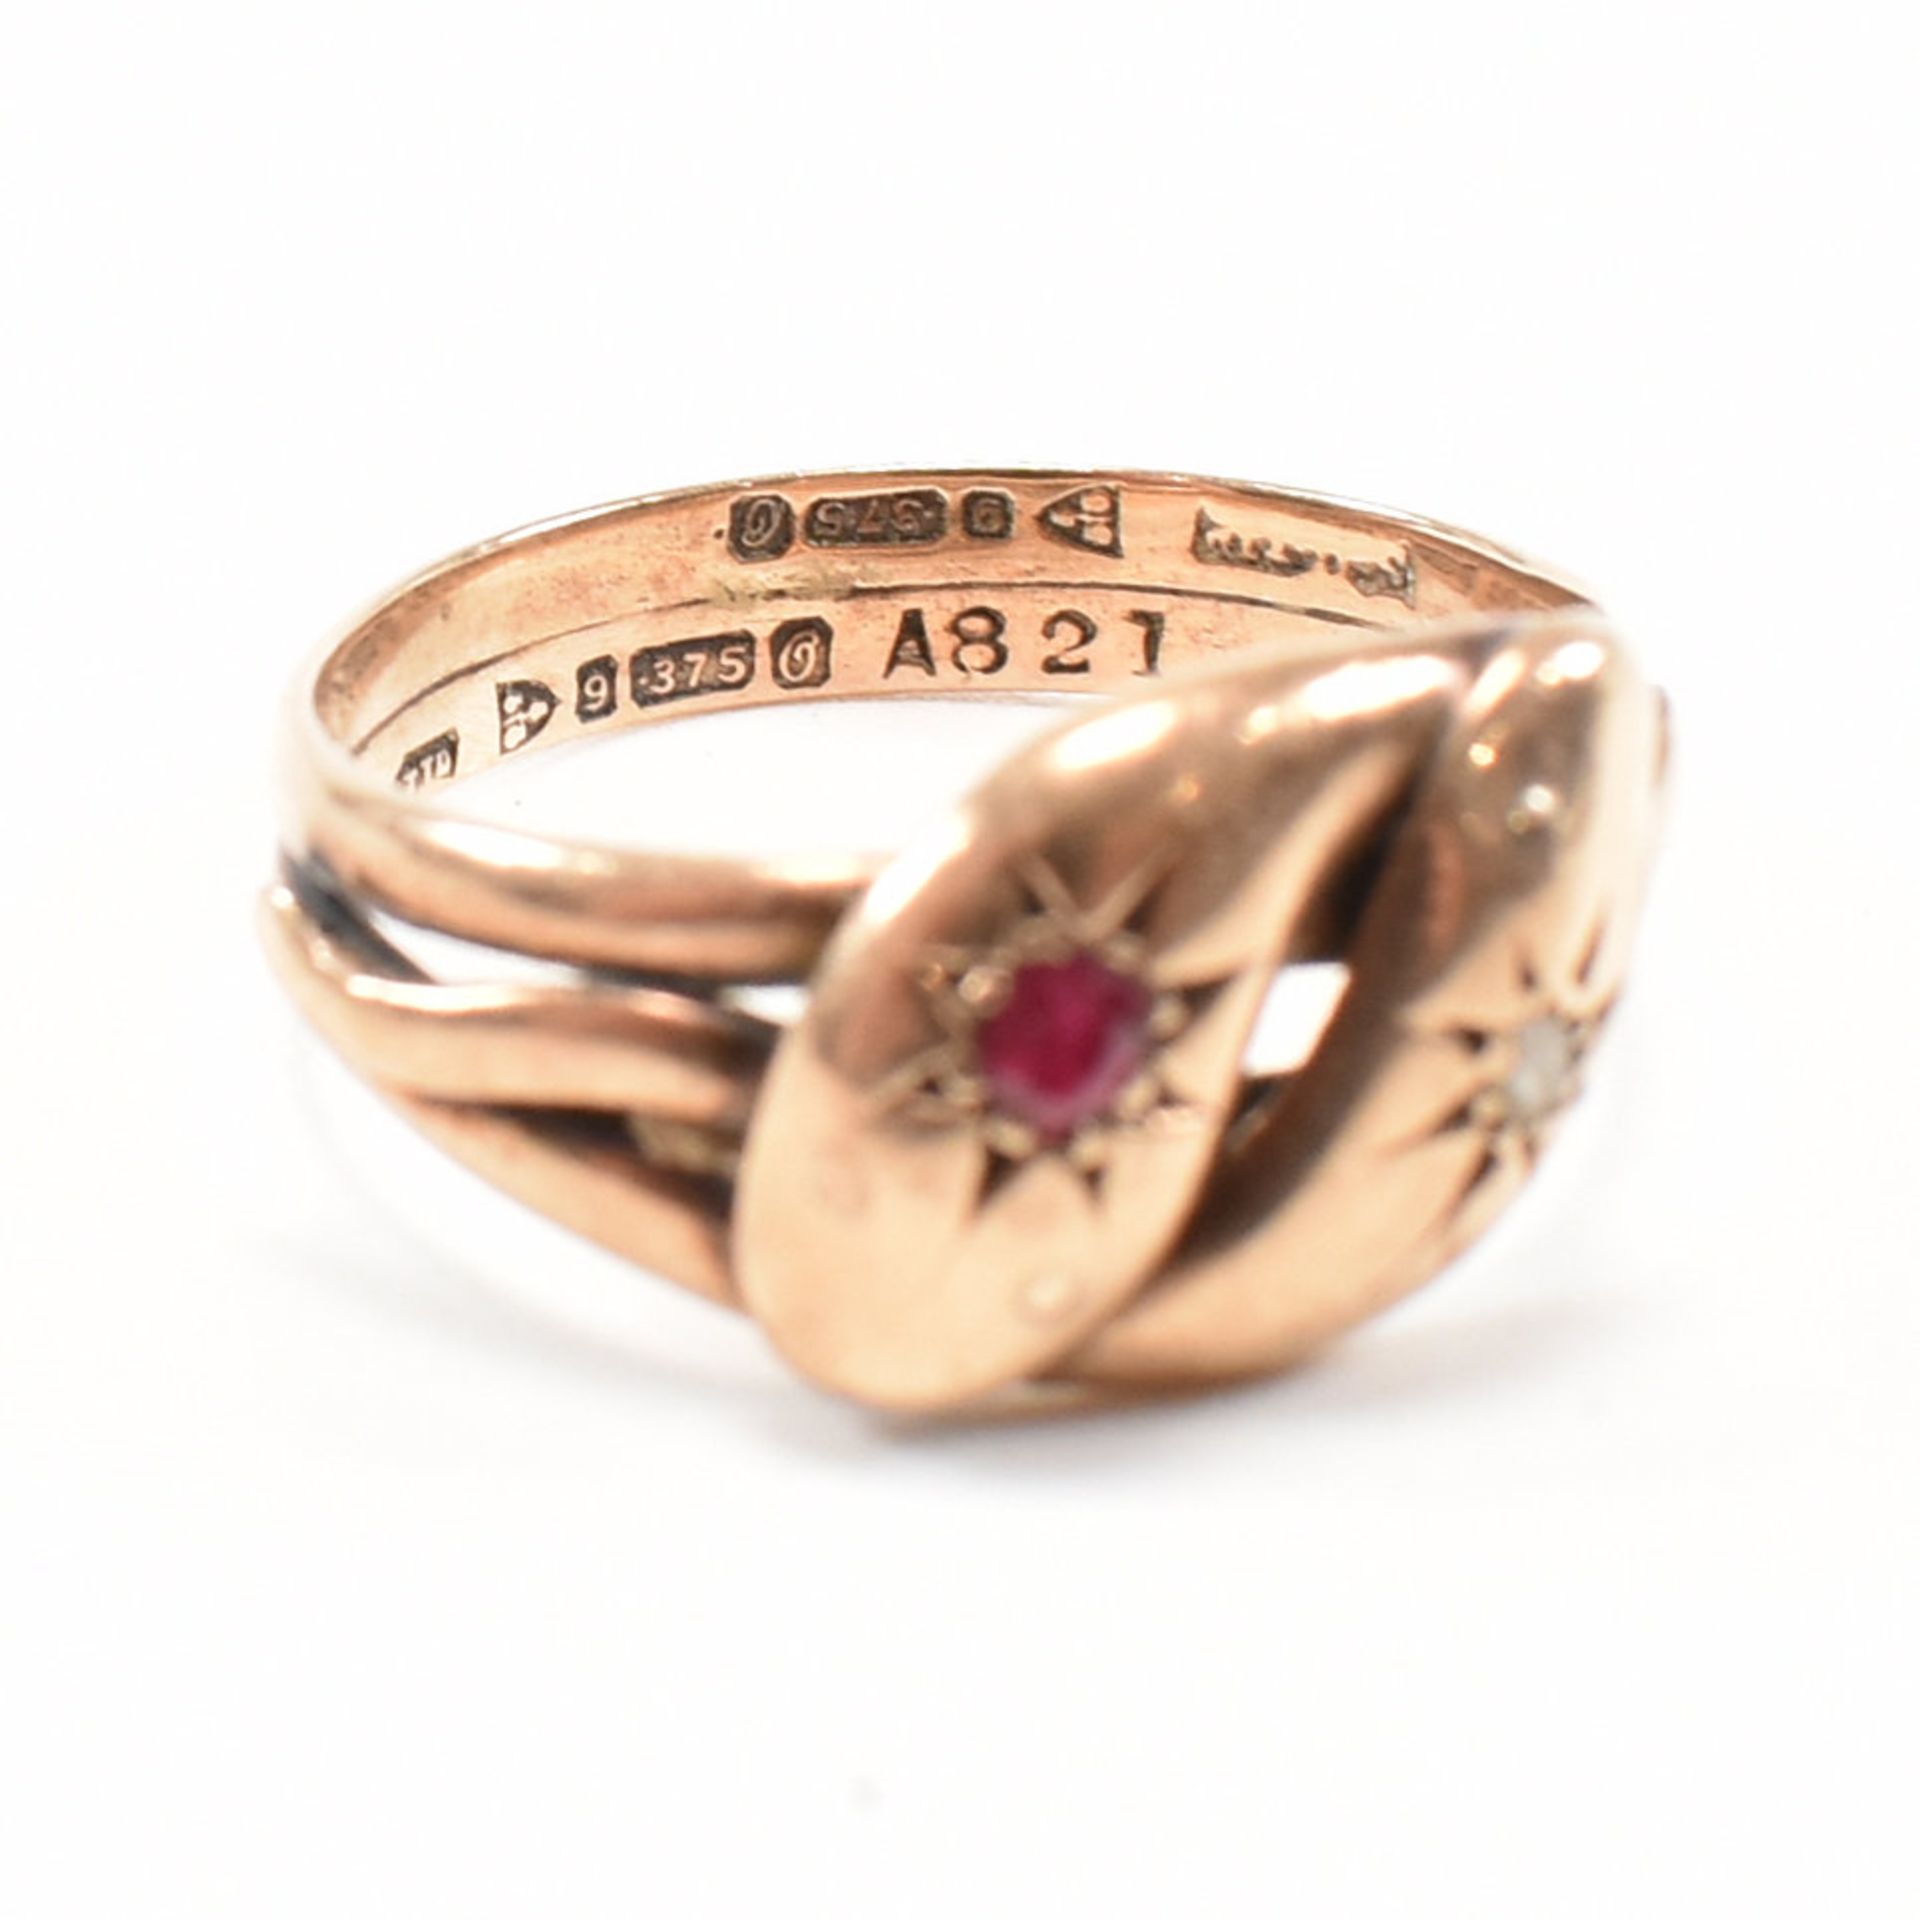 ANTIQUE HALLMARKED 9CT ROSE GOLD DIAMOND & RUBY TWIN SNAKE RING - Image 6 of 7